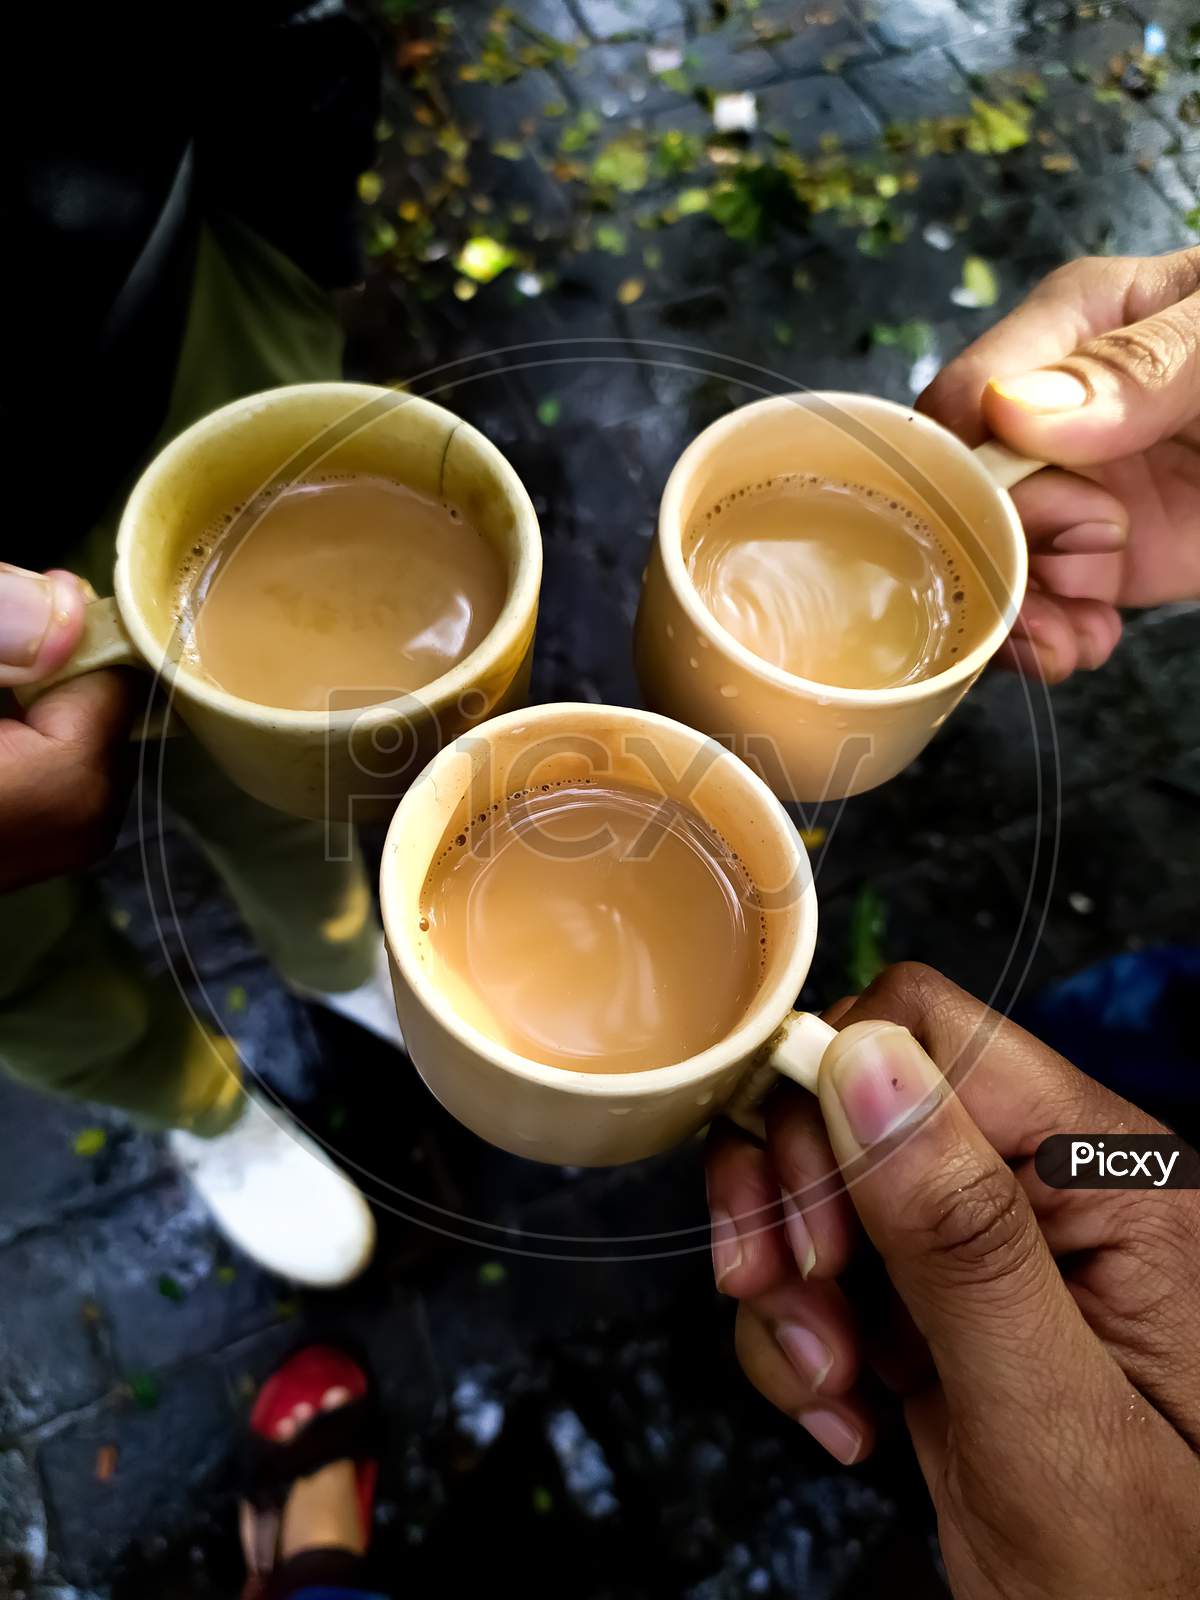 Cheering three friends with holding tea cups together by hands wet rainy climate. Lemon grass and ginger flavored healthy tea.